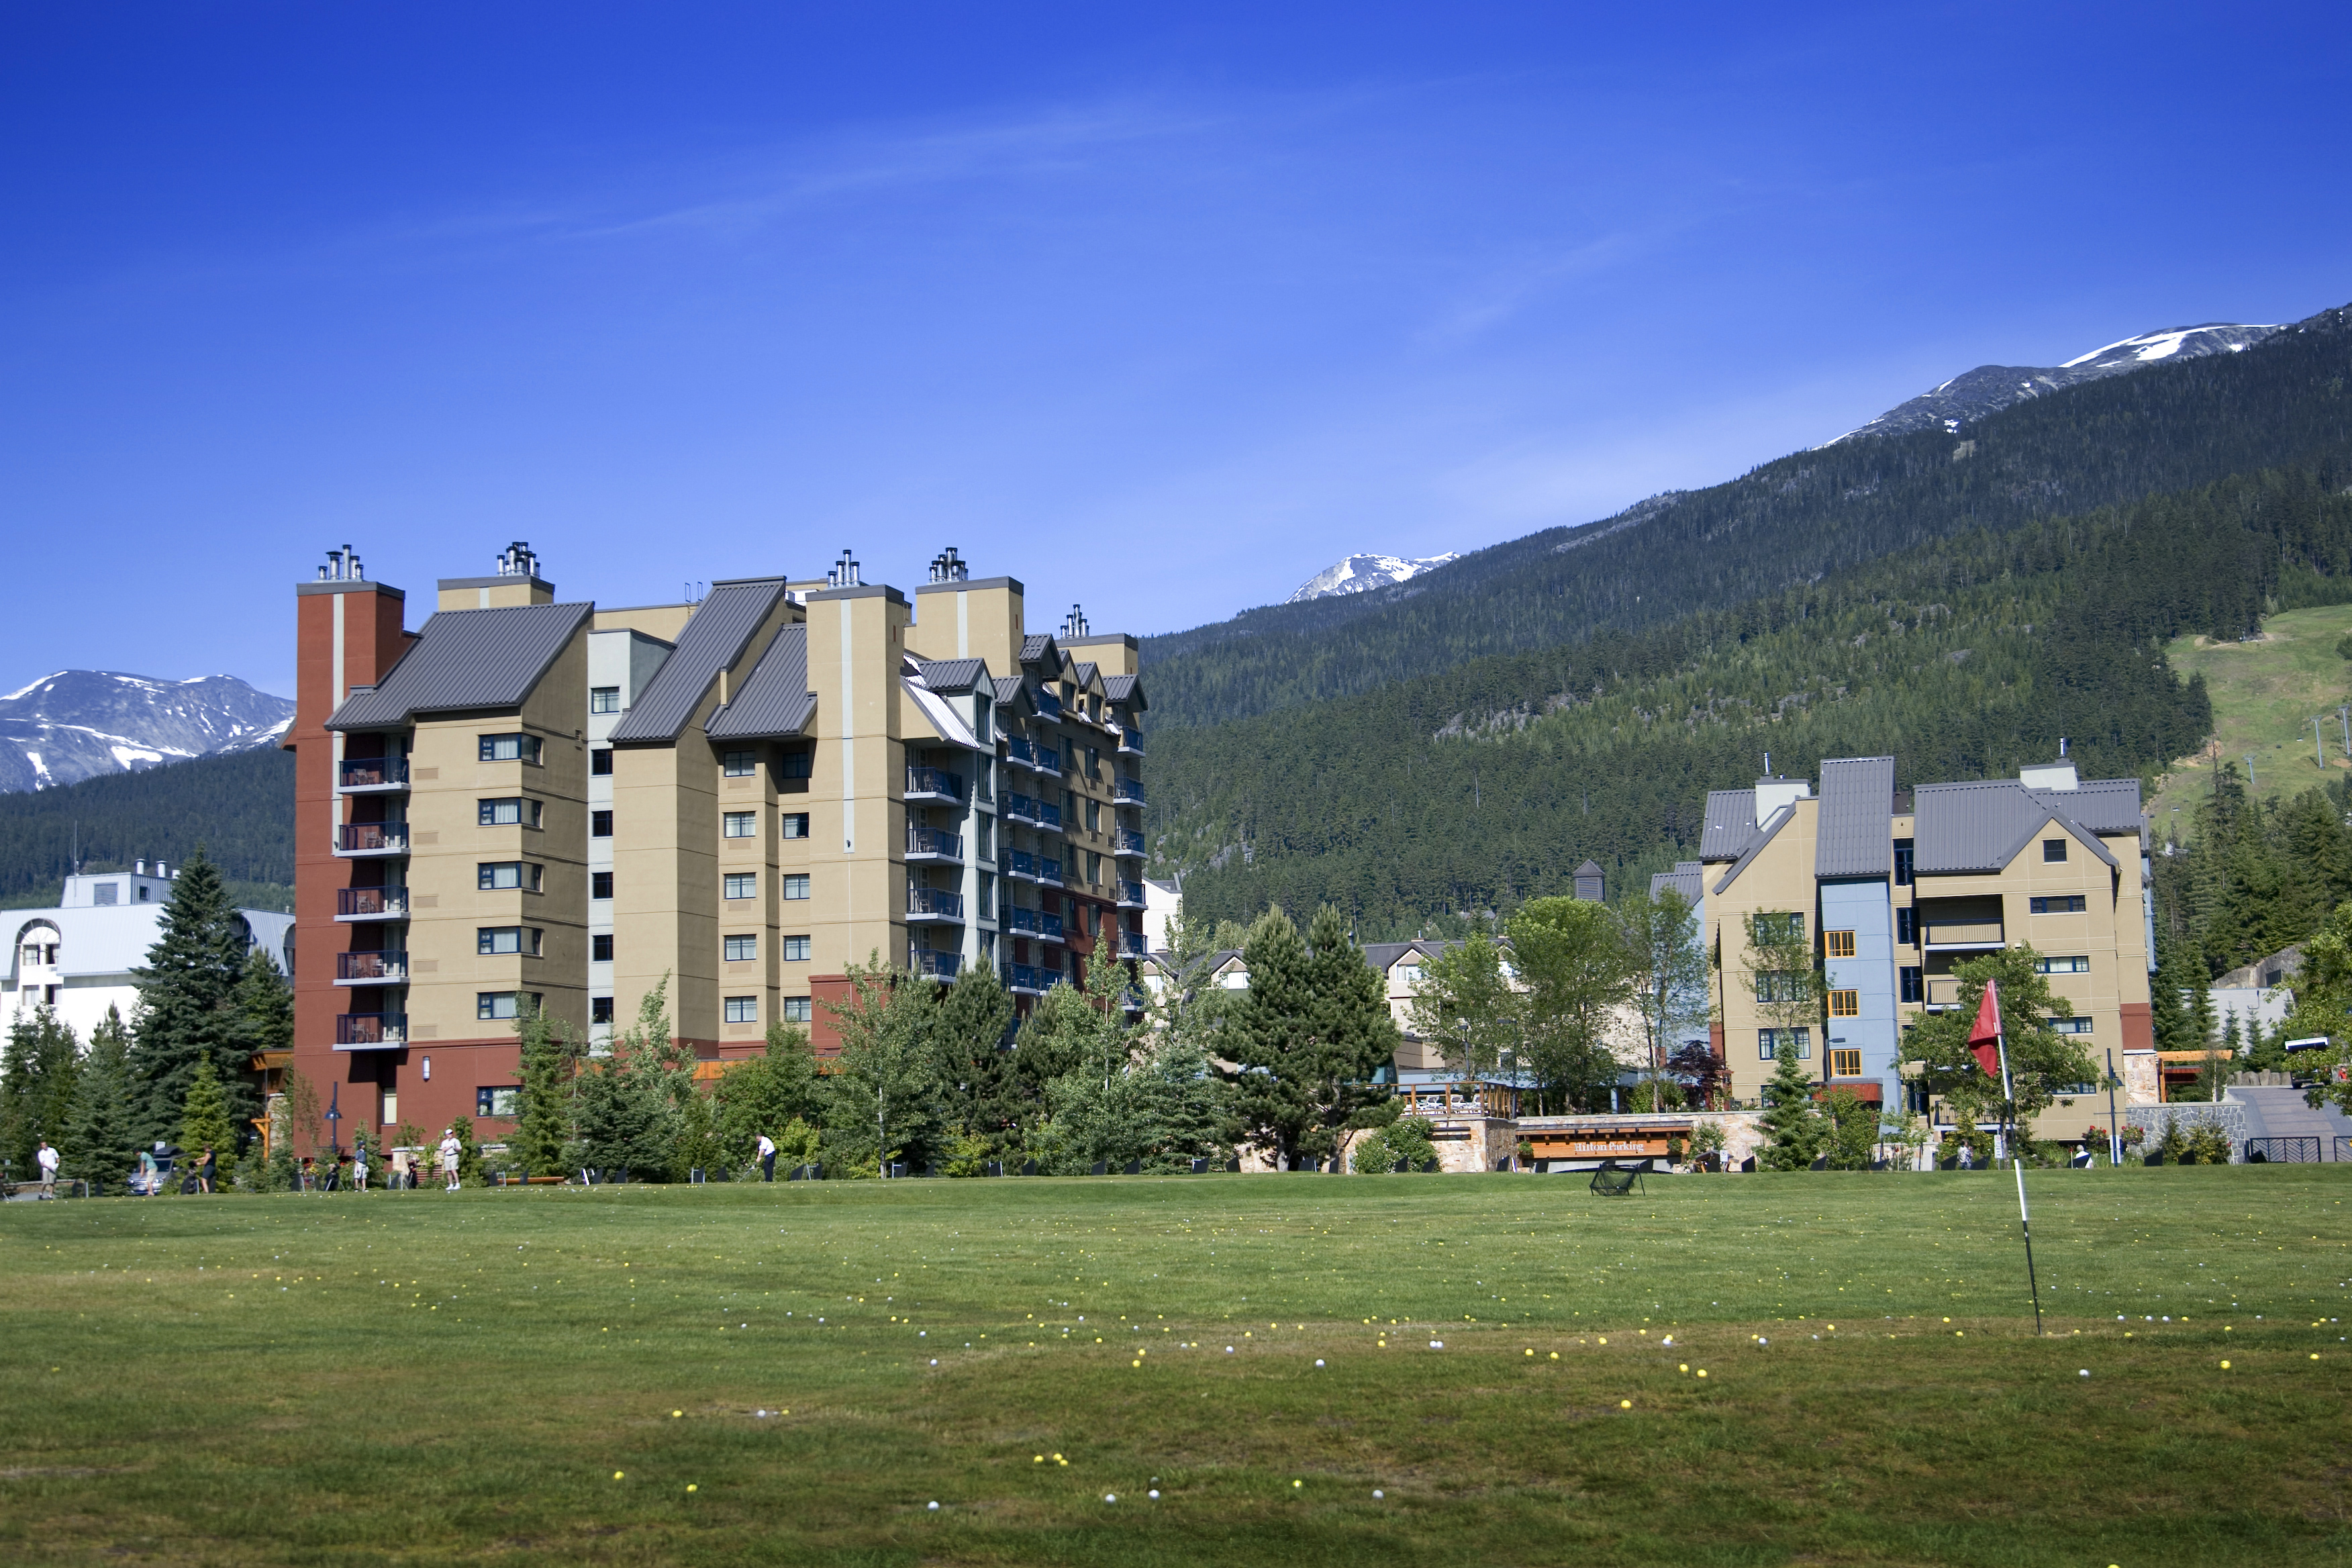 Golf Course and Mountainside View of Hotel